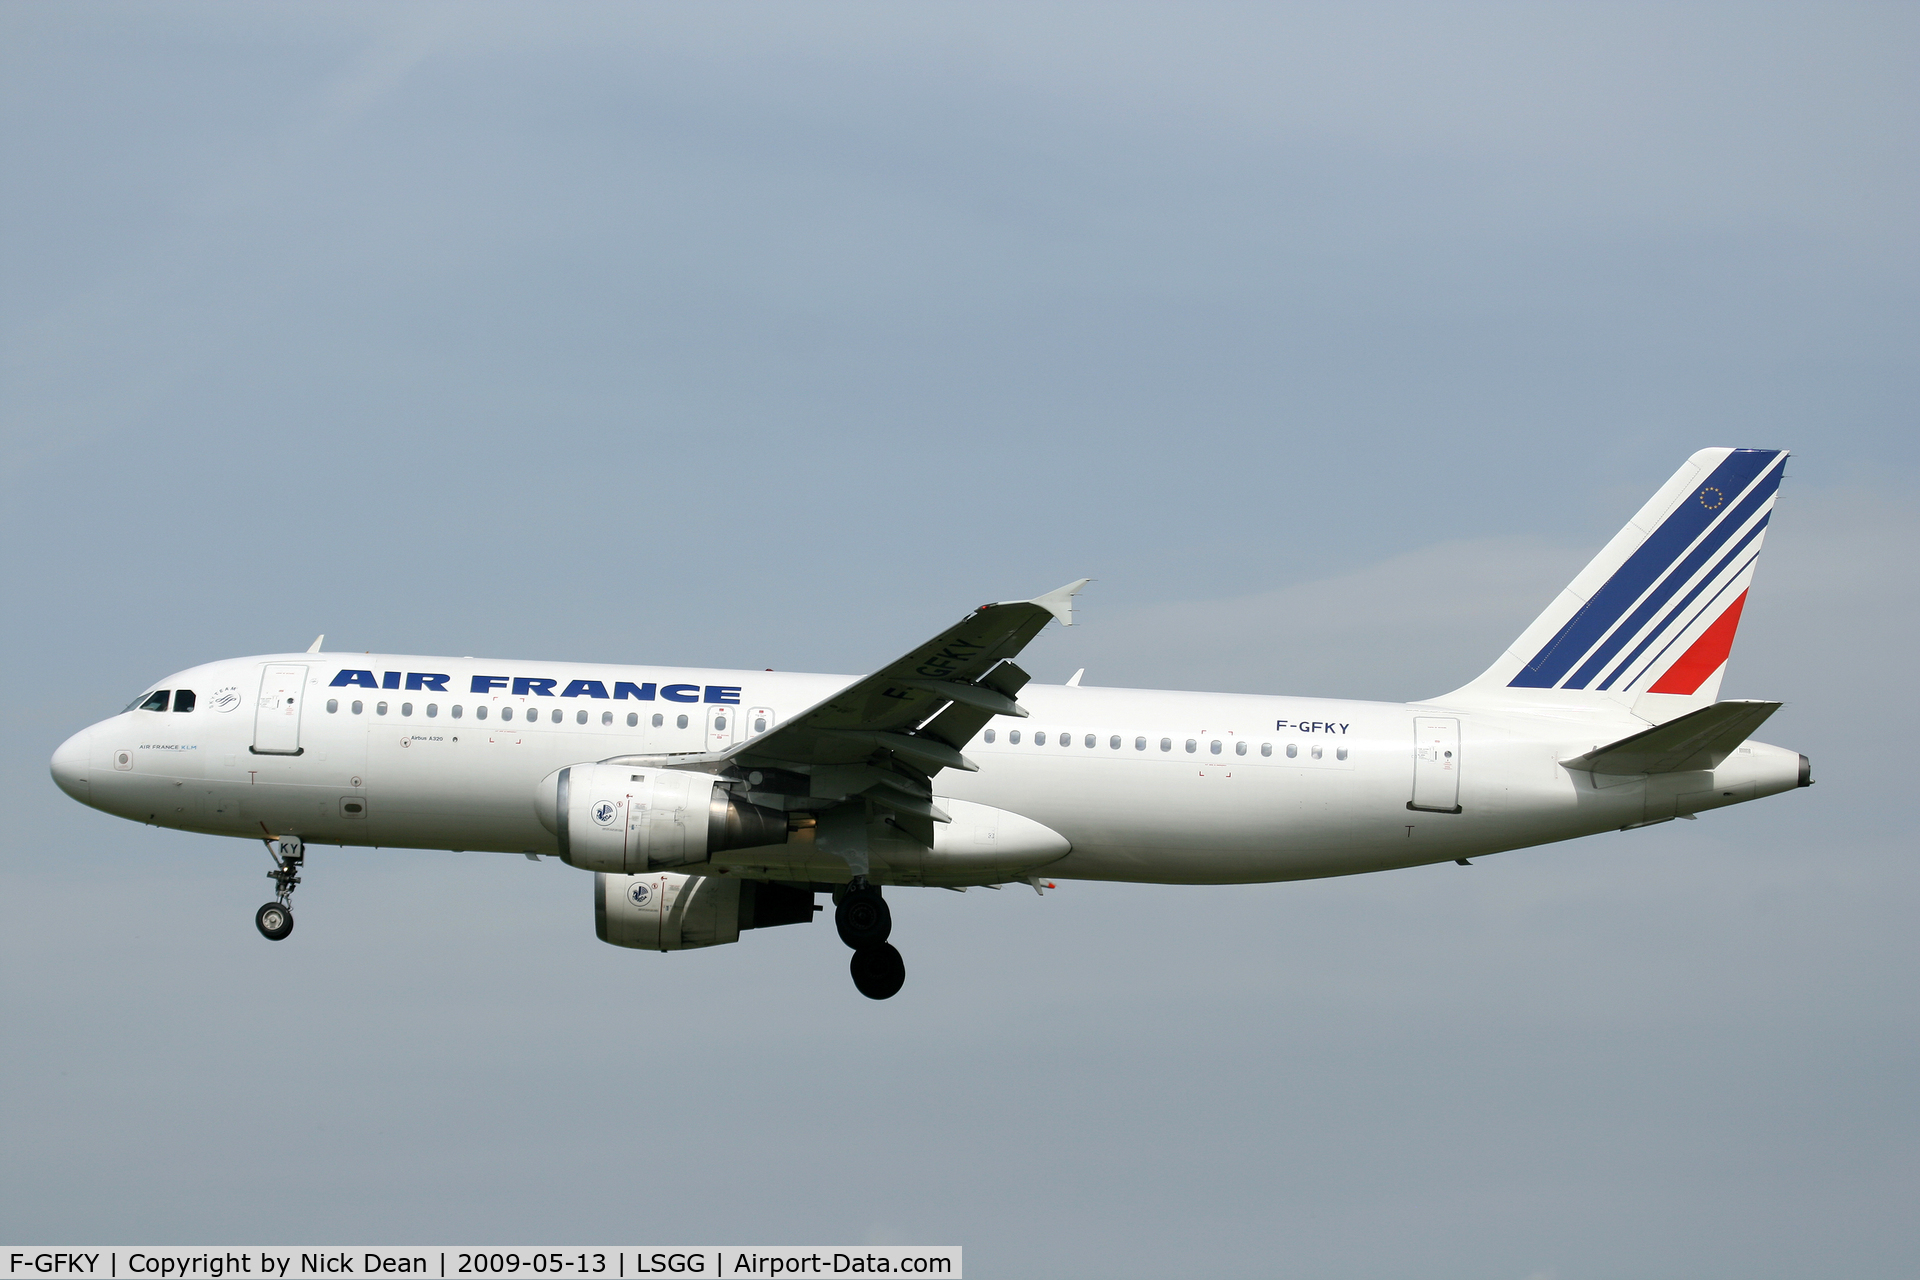 F-GFKY, 1991 Airbus A320-211 C/N 0285, LSGG